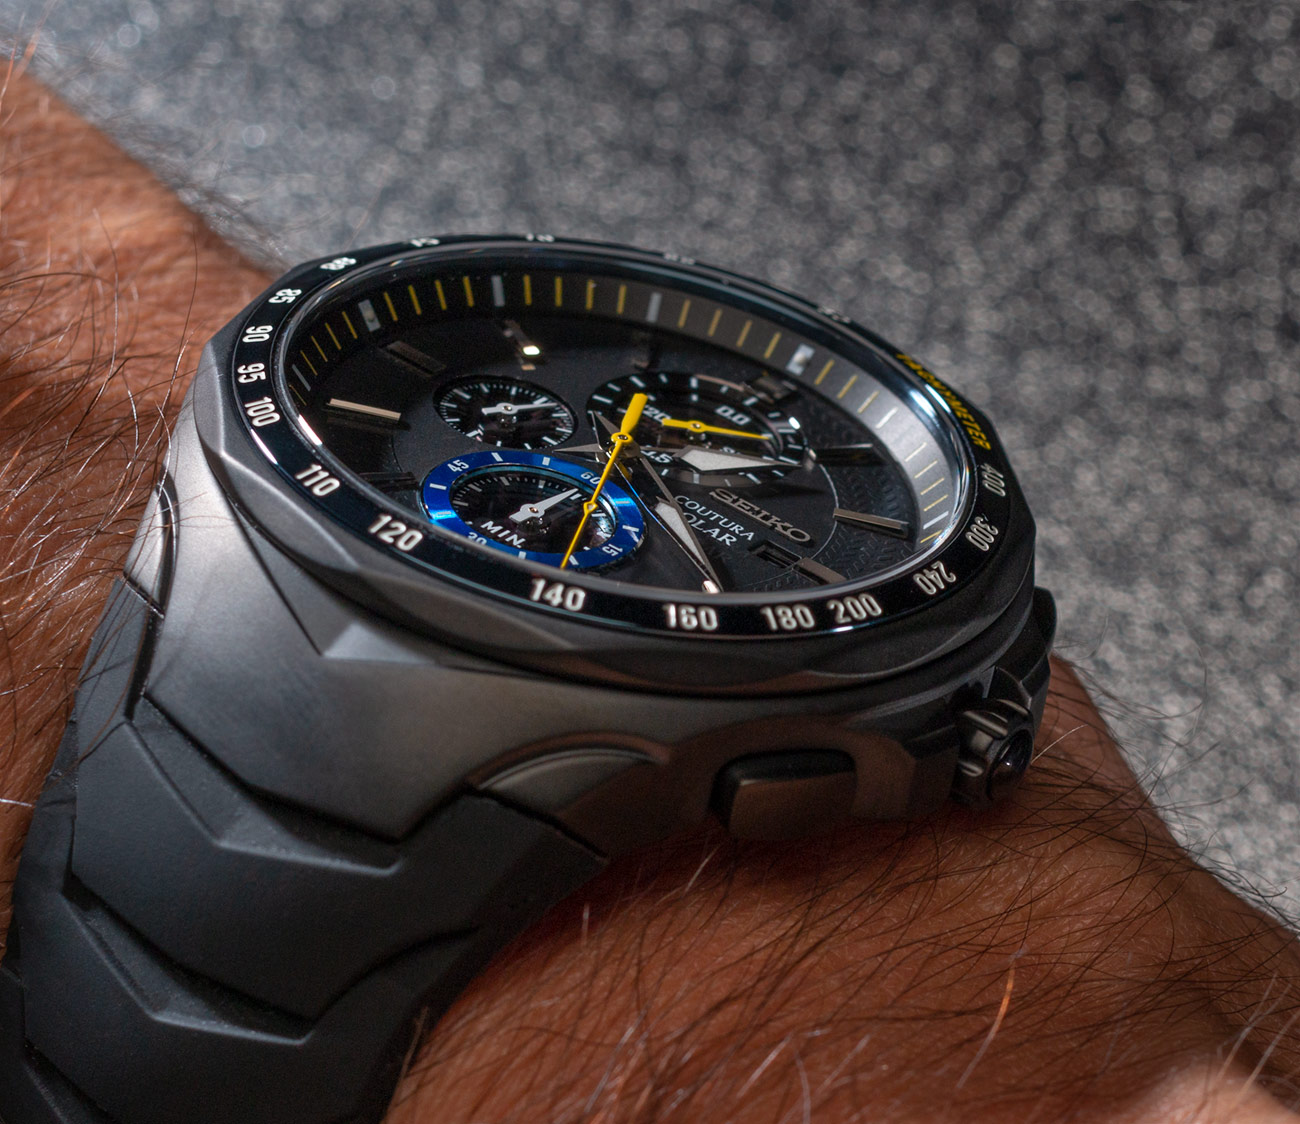 Seiko Coutura Solar Chronograph Jimmie Johnson Special Edition Watch  Hands-On ABlogtoWatch 